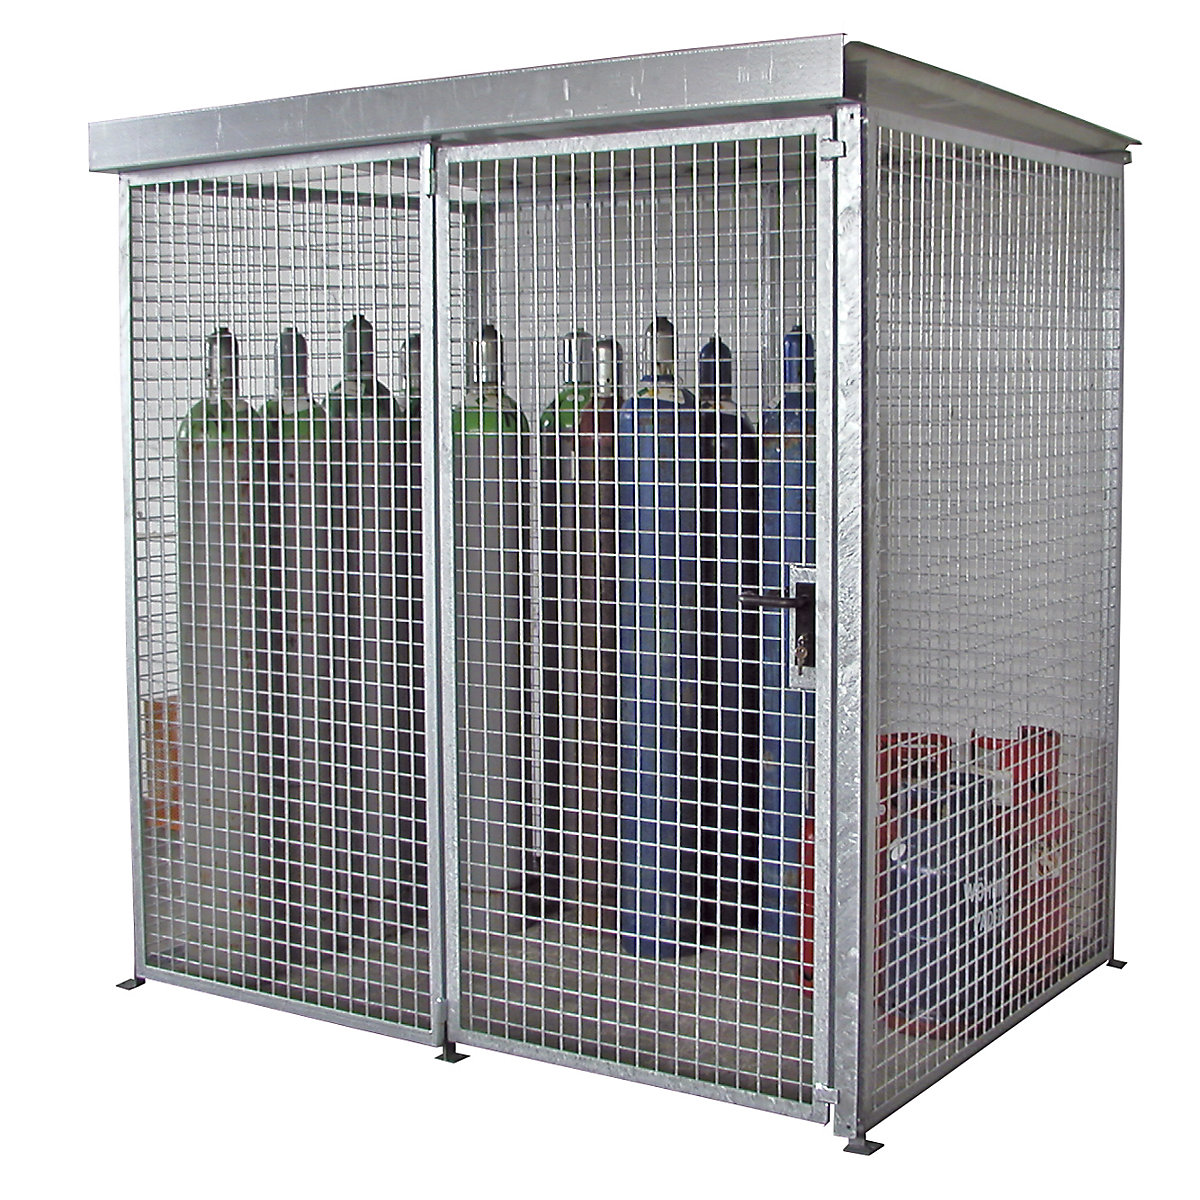 EUROKRAFTpro – Mesh gas cylinder cage, with roof and base disc, WxD 2100 x 1500 mm